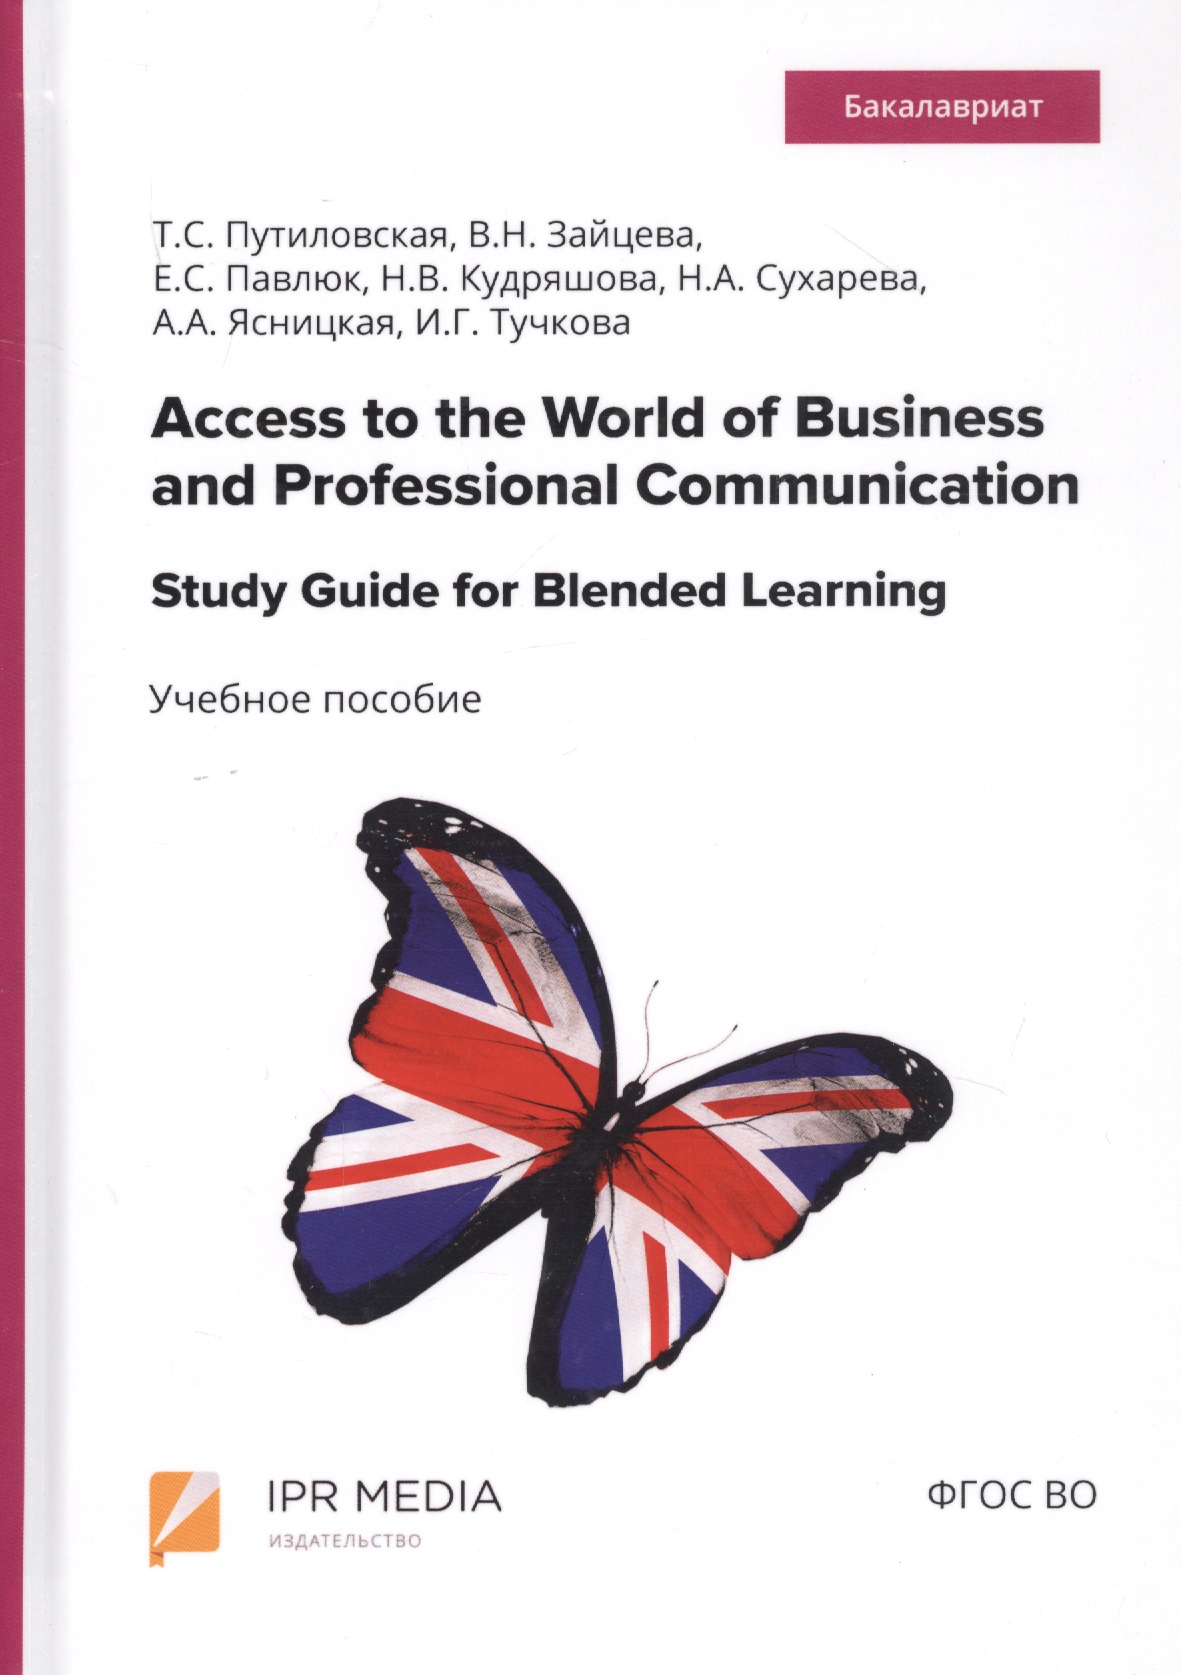 Access to the World of Business and Professional Communication. Study Guide for Blended Learning. Step I (Modules I and II).  